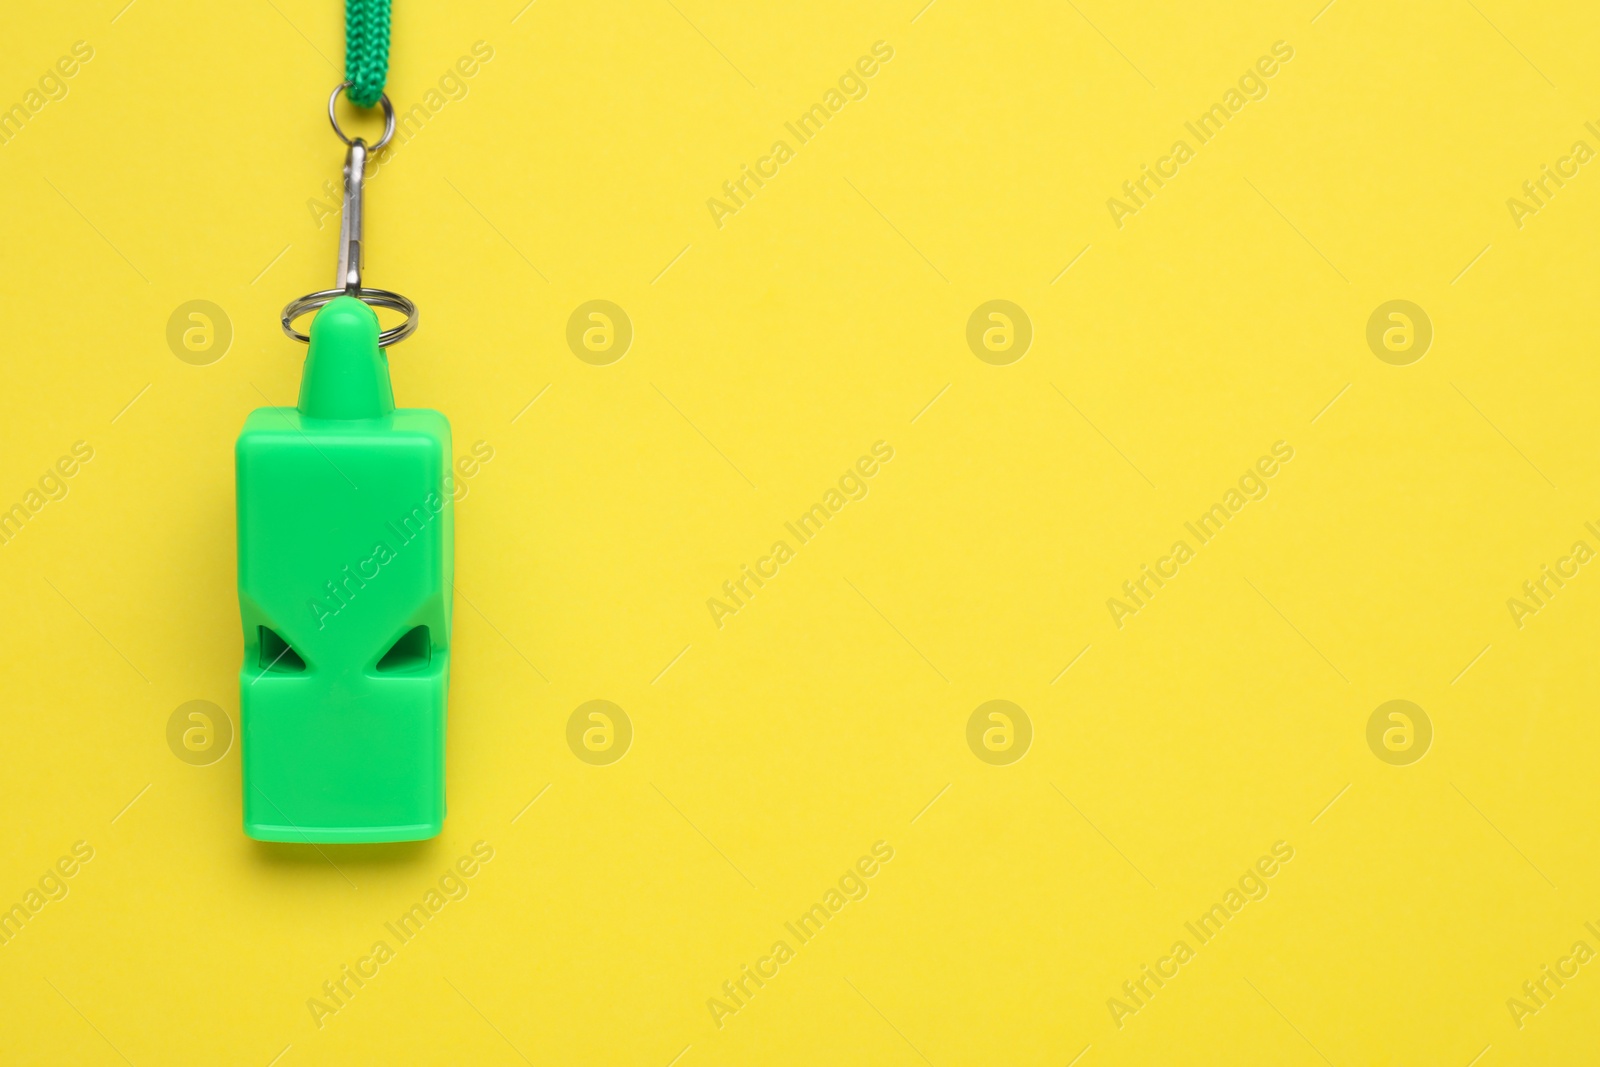 Photo of One green whistle with cord on yellow background, top view. Space for text